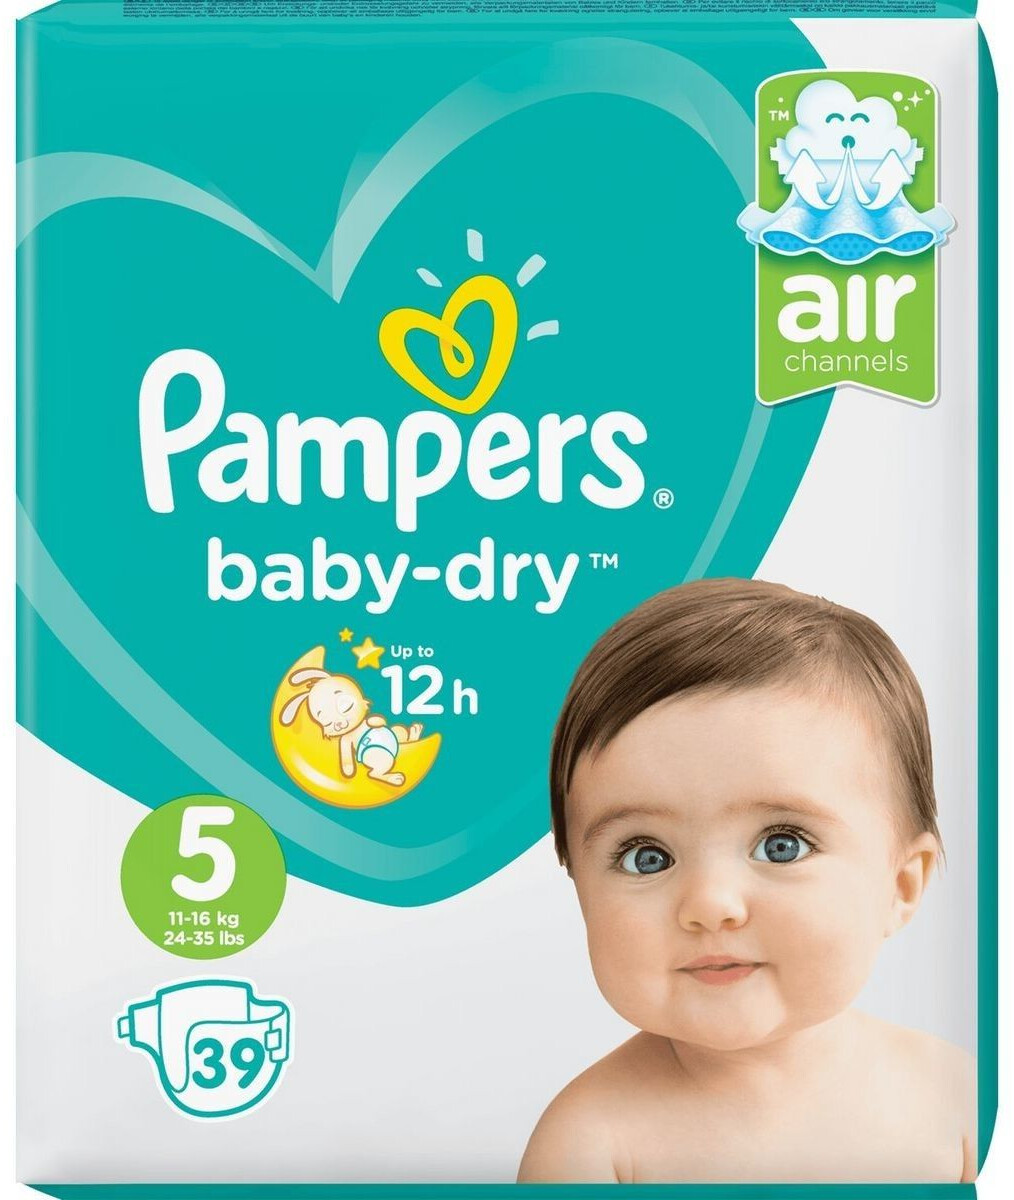 pampers material